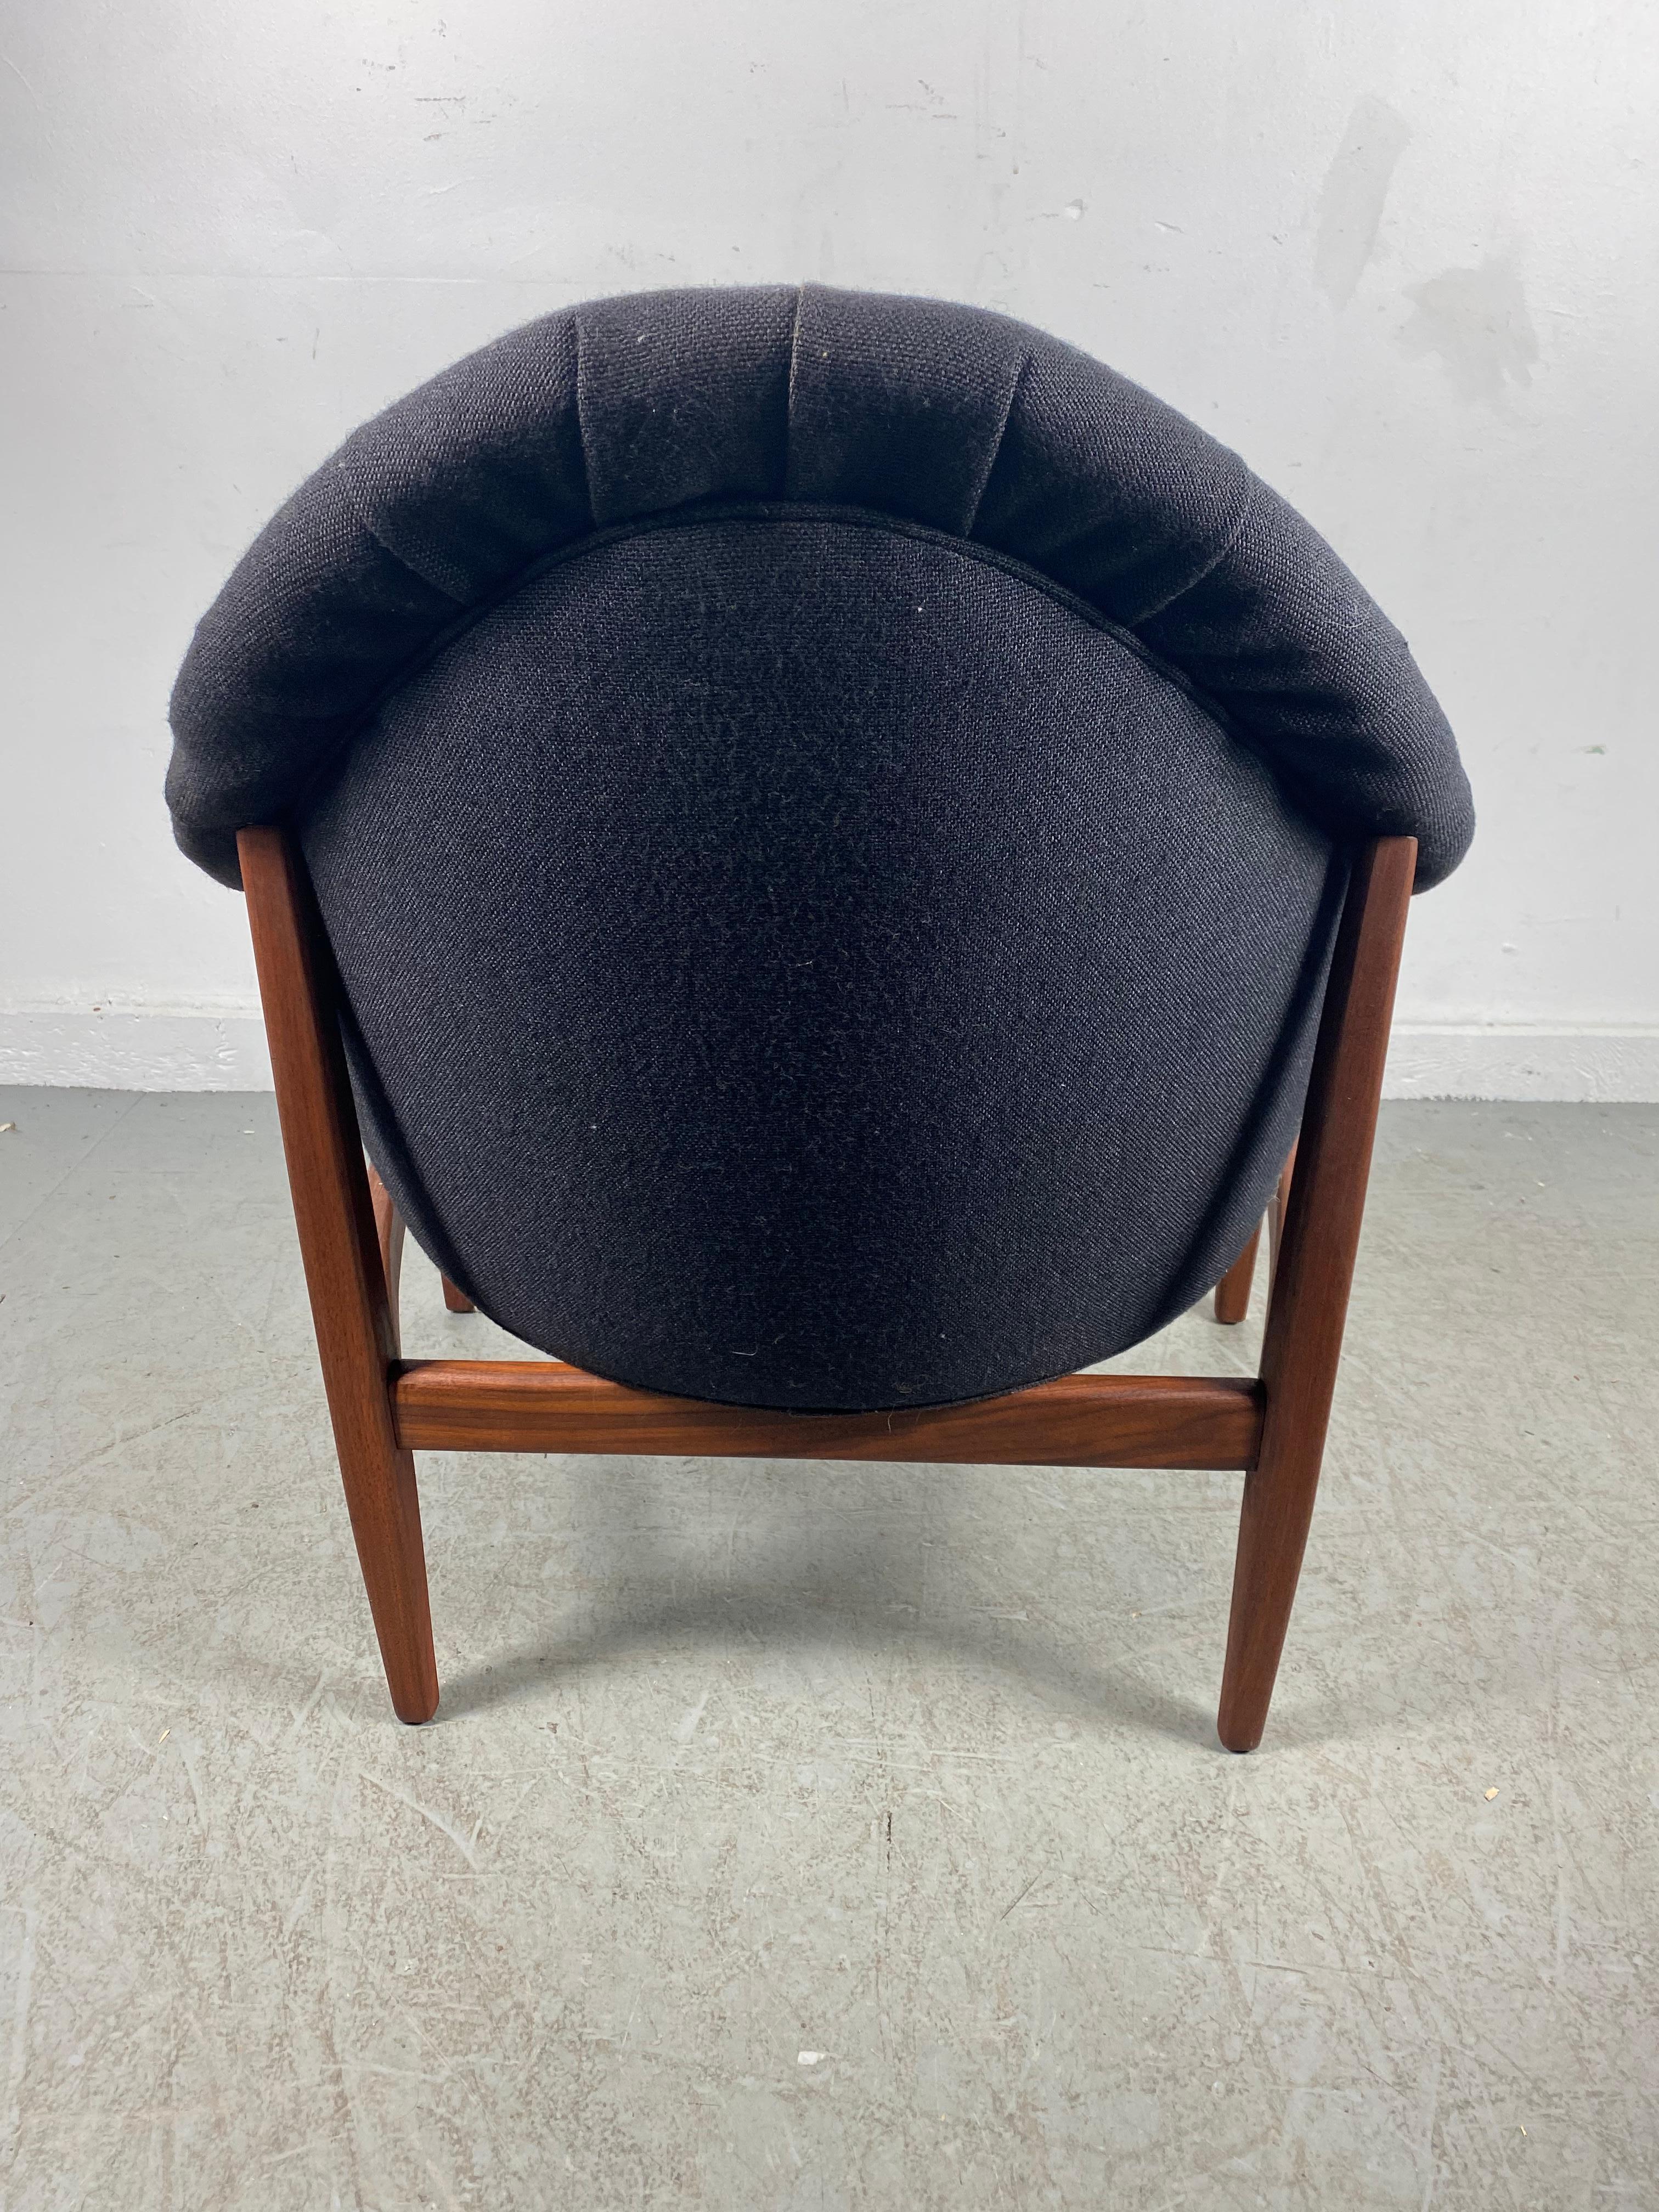 American Thayer Coggin by Milo Baughman Rare Exposed Frame Lounge Chair Circa 1965 For Sale